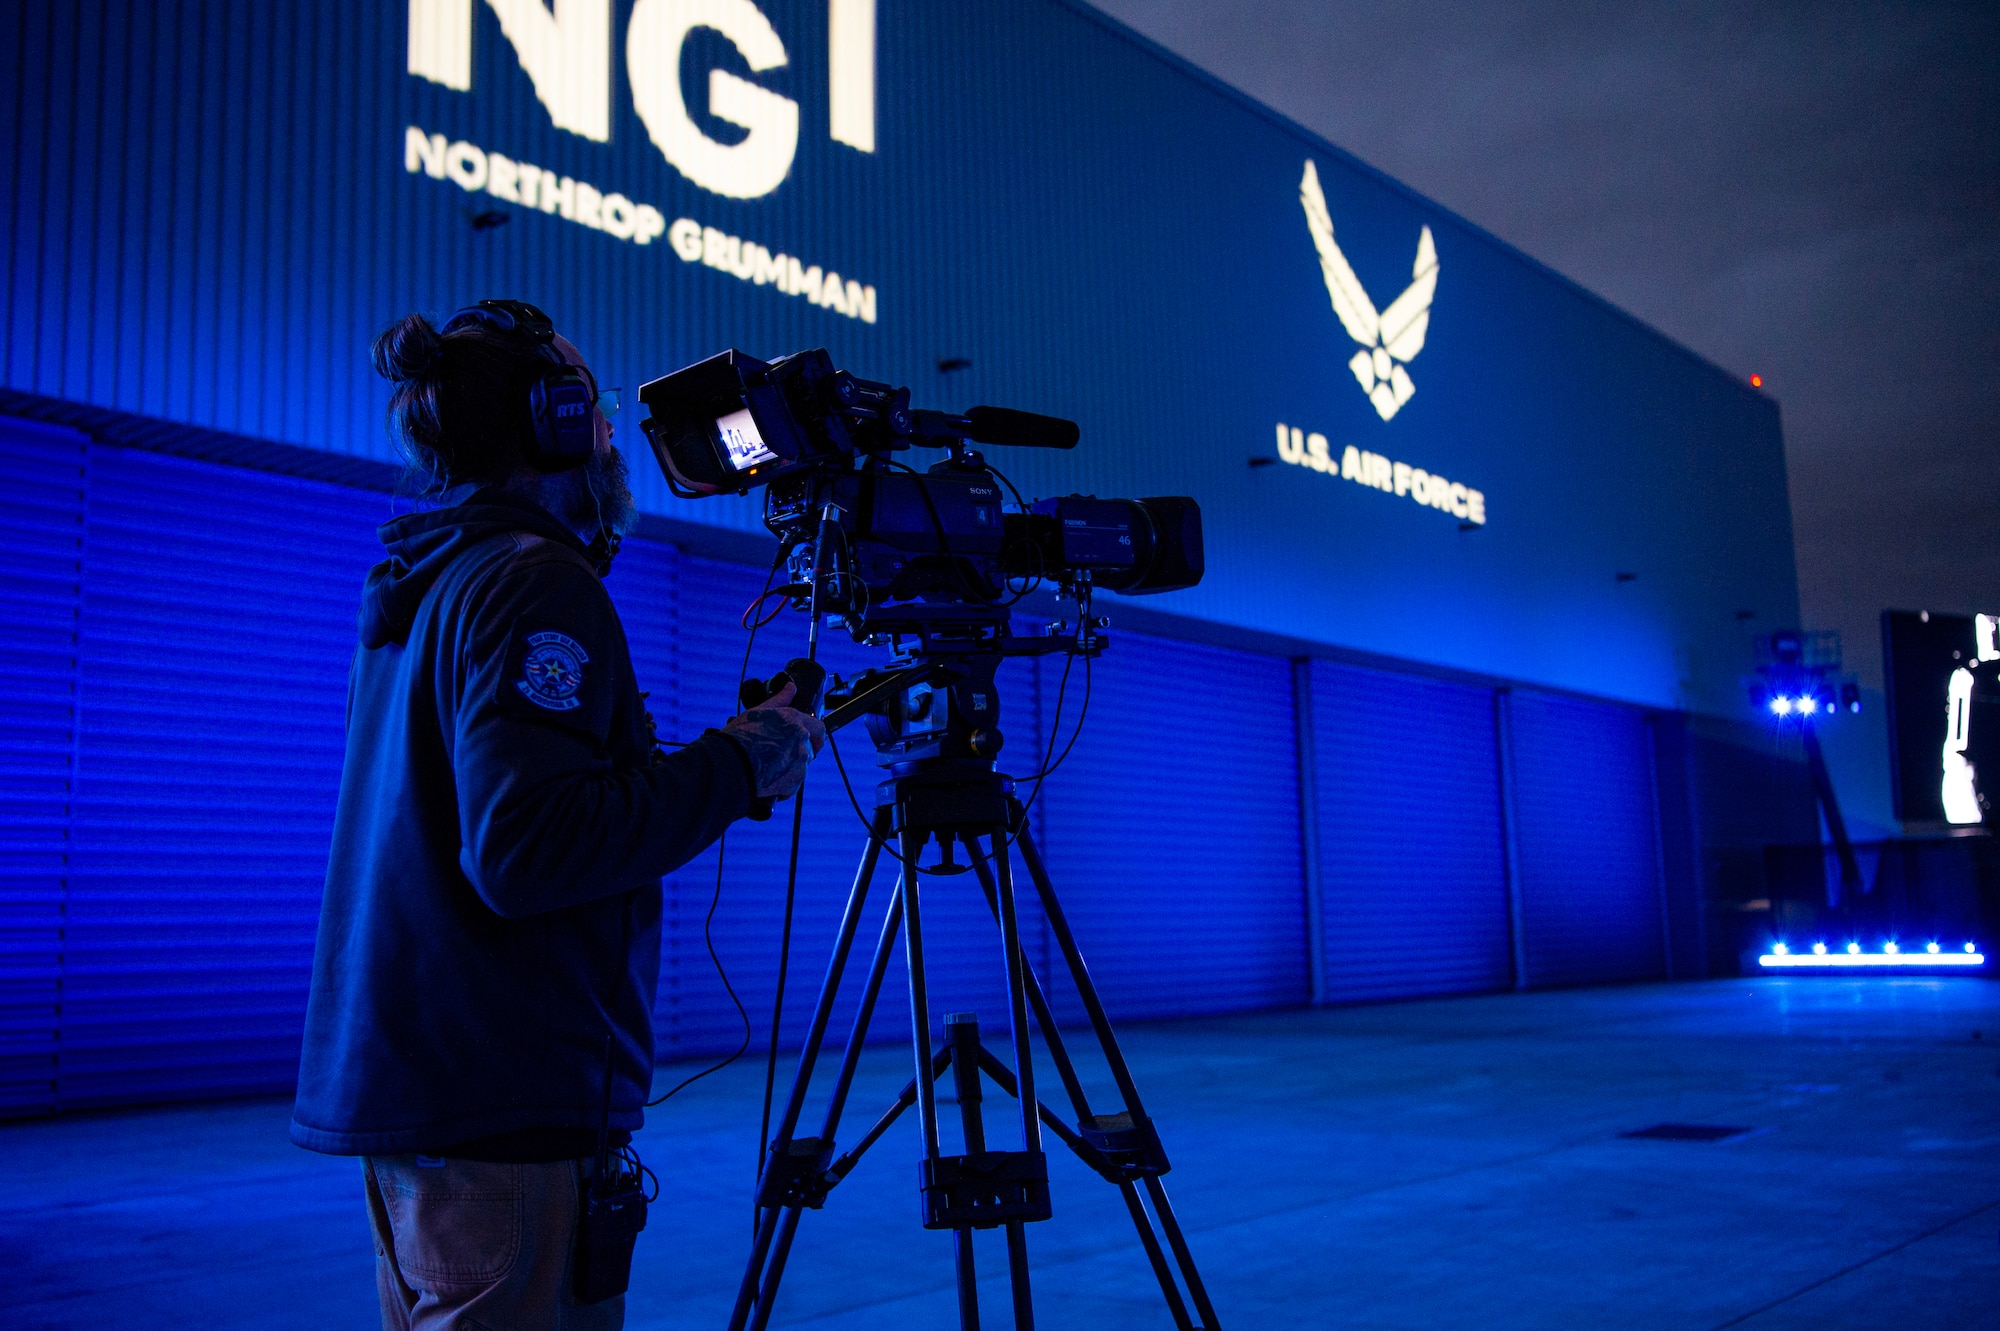 Adam White, 2d Audiovisual Squadron, producer/director, films the B-21 Raider unveiling ceremony at Northrop Grumman’s manufacturing facility on Air Force Plant 42 in Palmdale, California, Dec. 2, 2022.